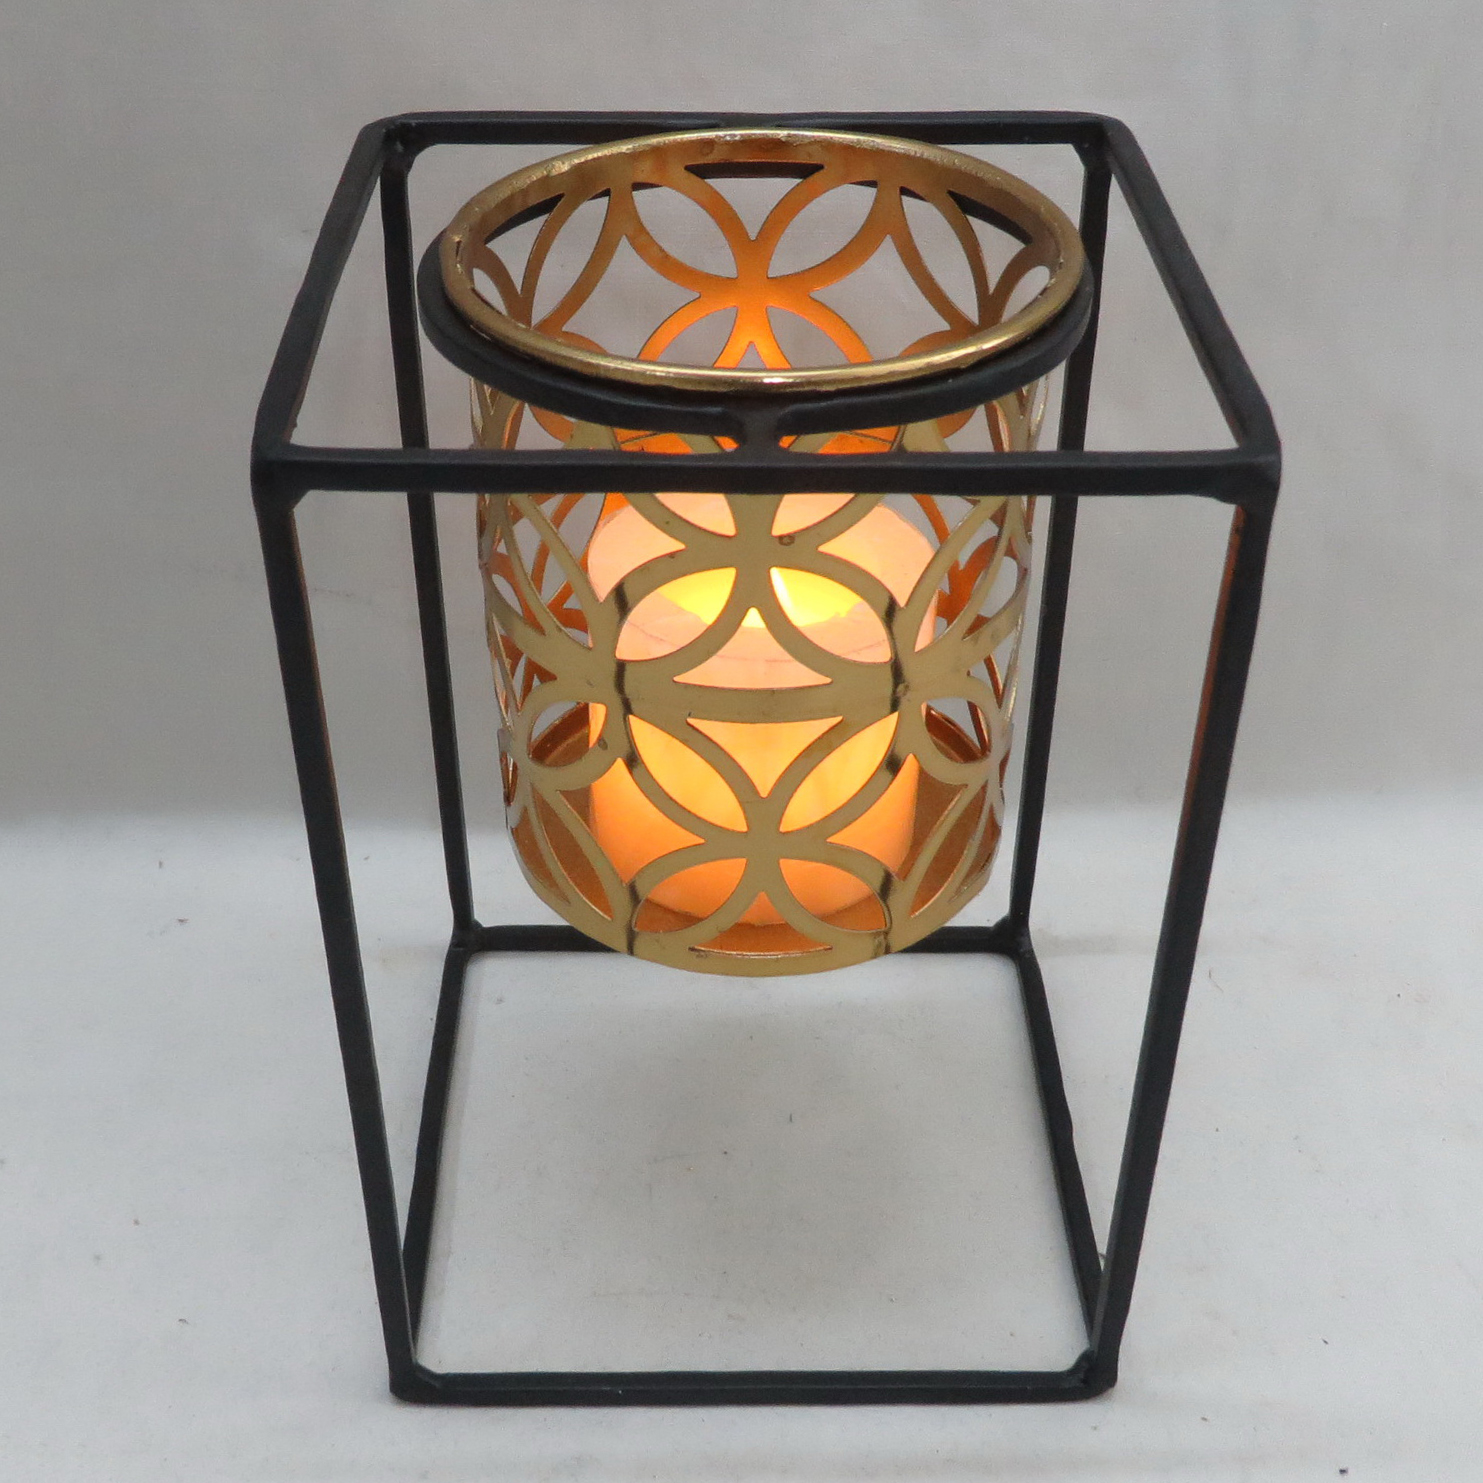 home decoration tealight candle tealight holder